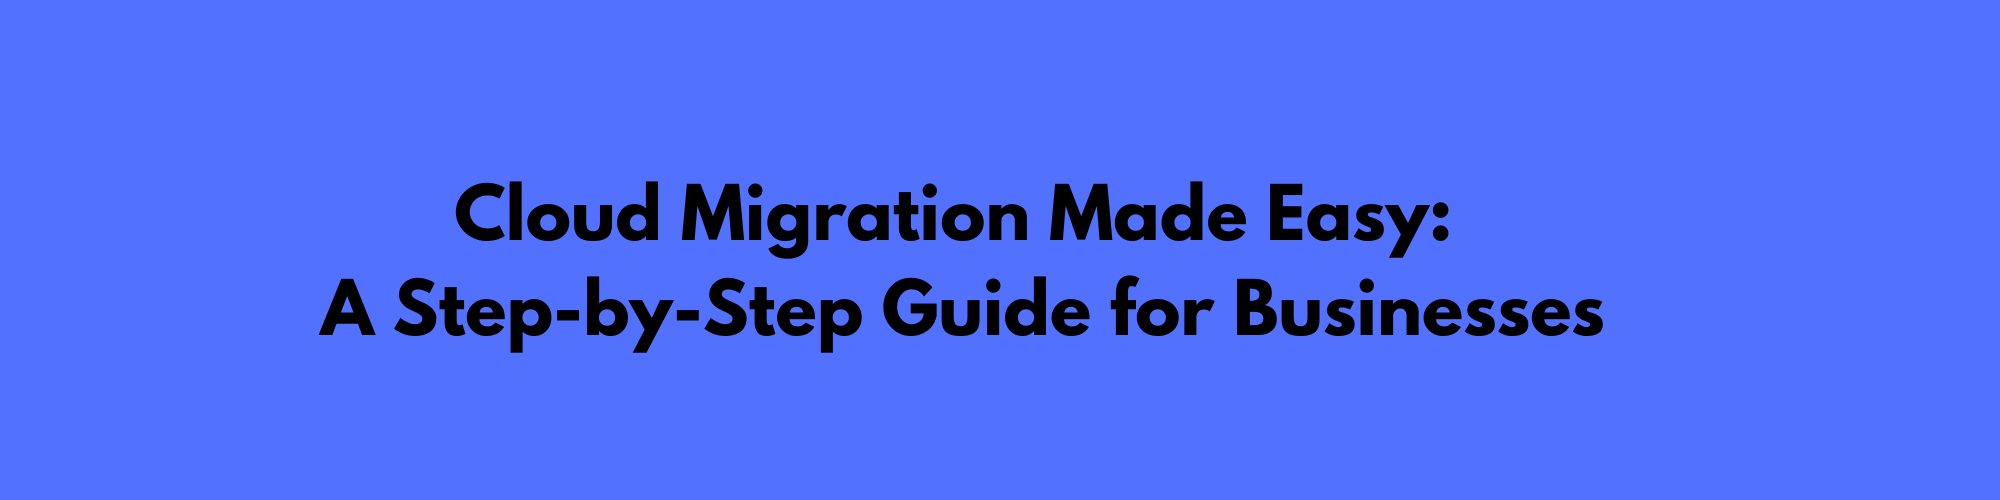 Cloud Migration Made Easy: A Step-by-Step Guide for Businesses